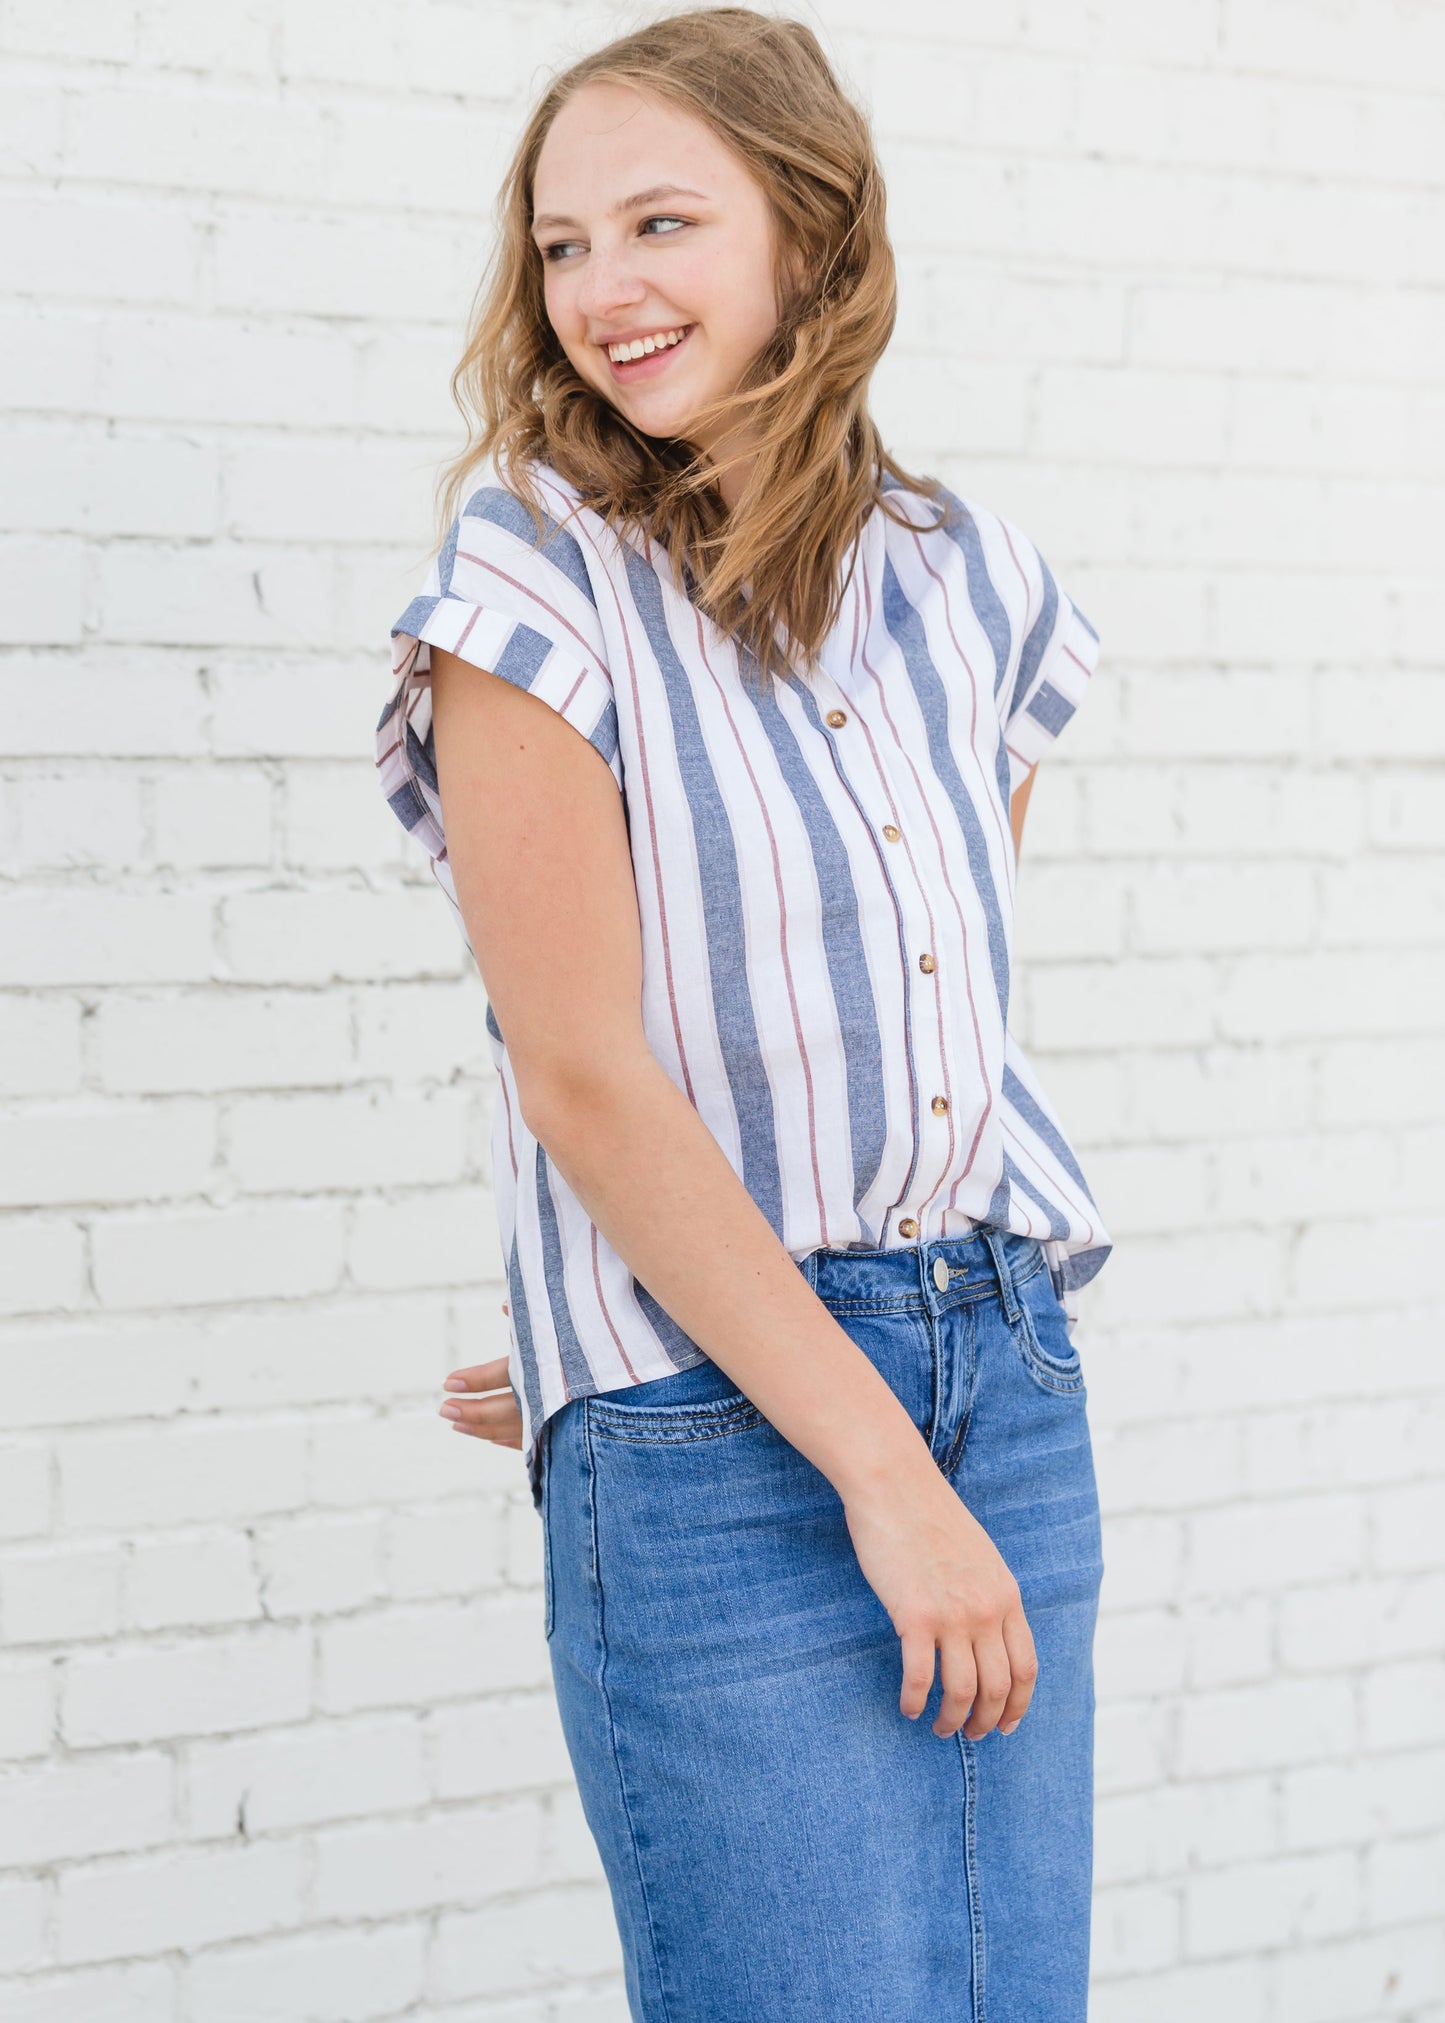 Navy and White Striped Tee - FINAL SALE Tops